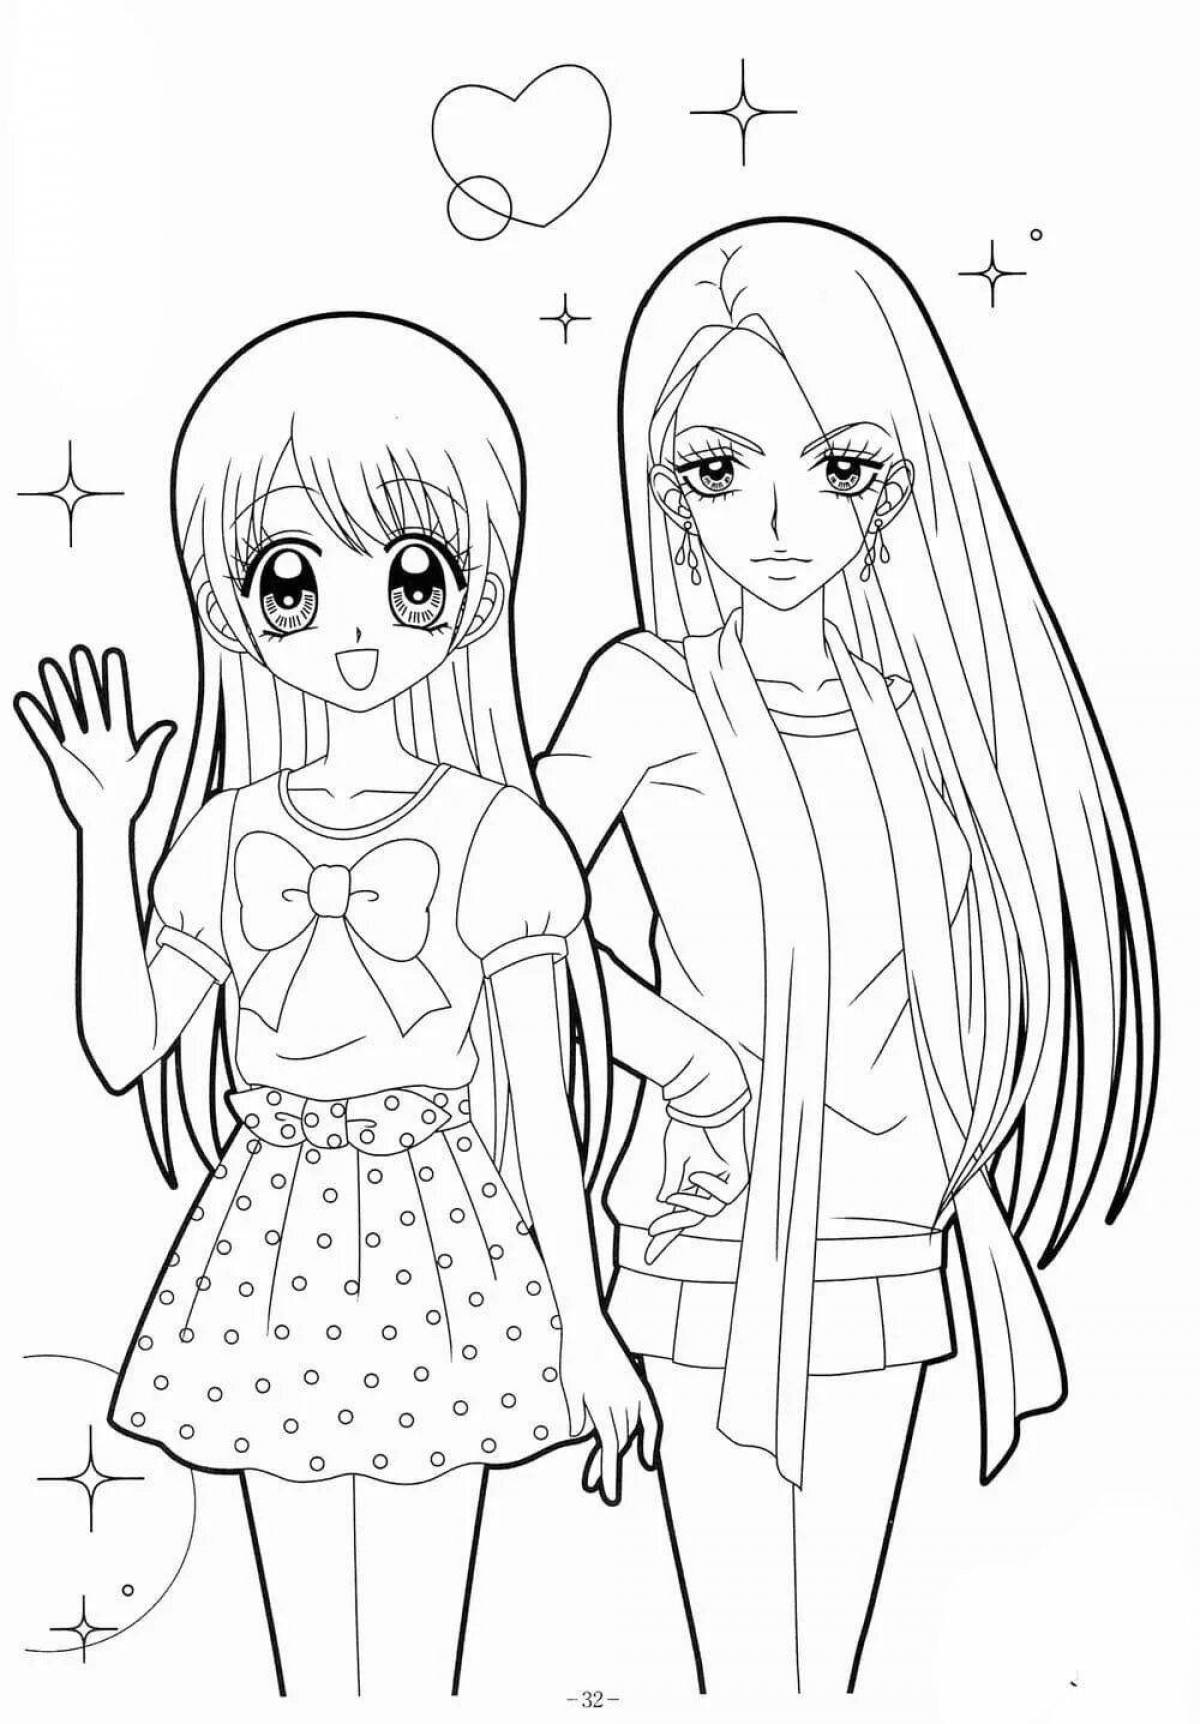 Coloring book sparkling anime girlfriends